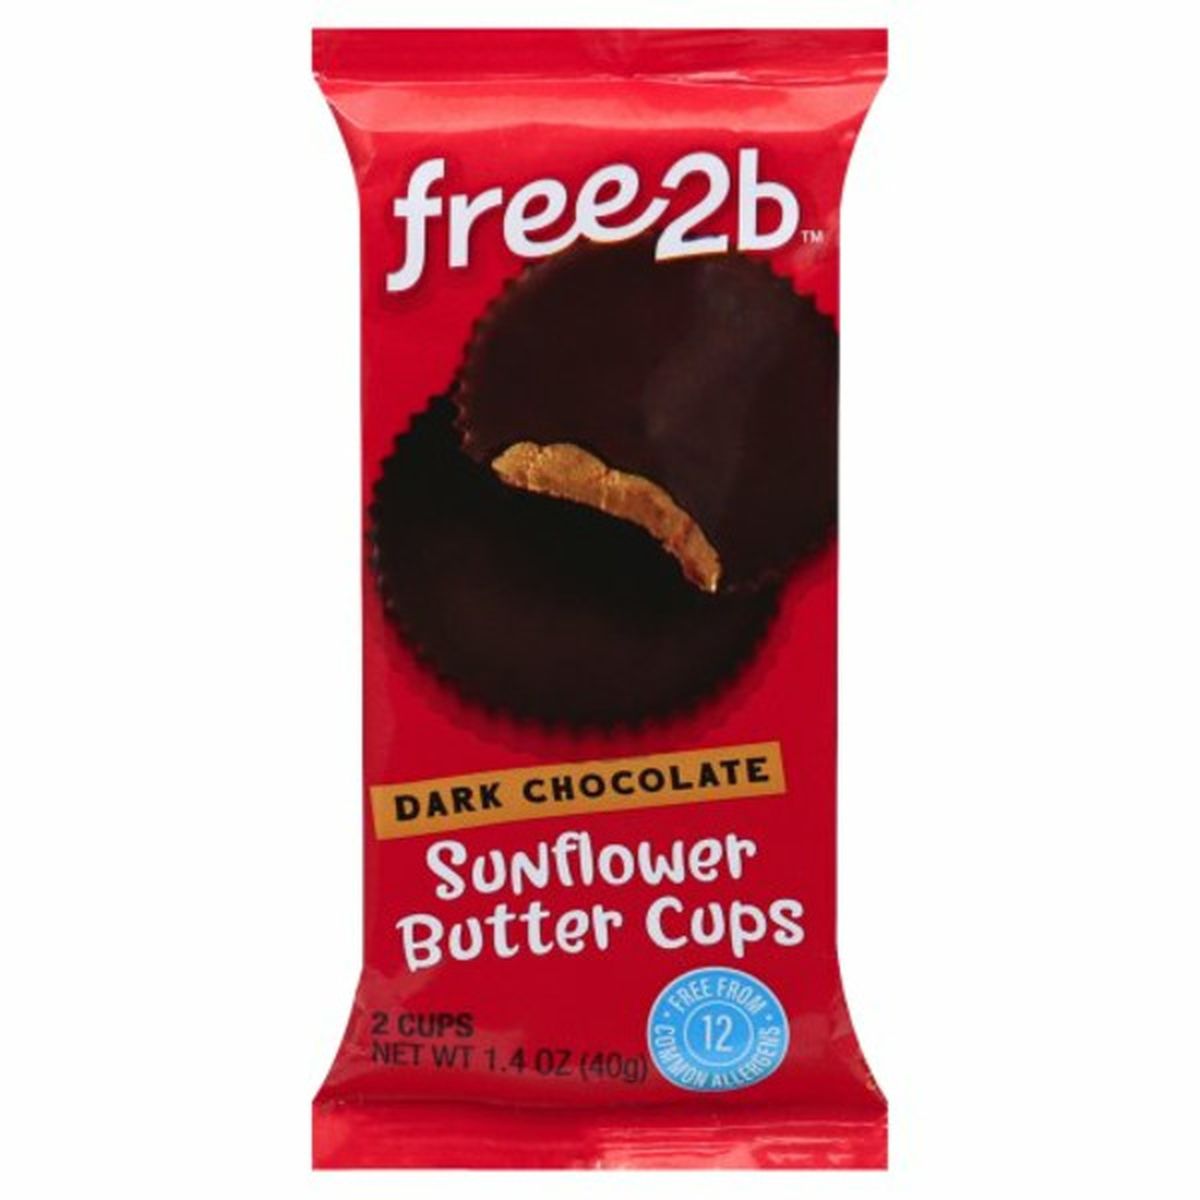 Calories in Free2b Sunflower Butter Cups, Dark Chocolate